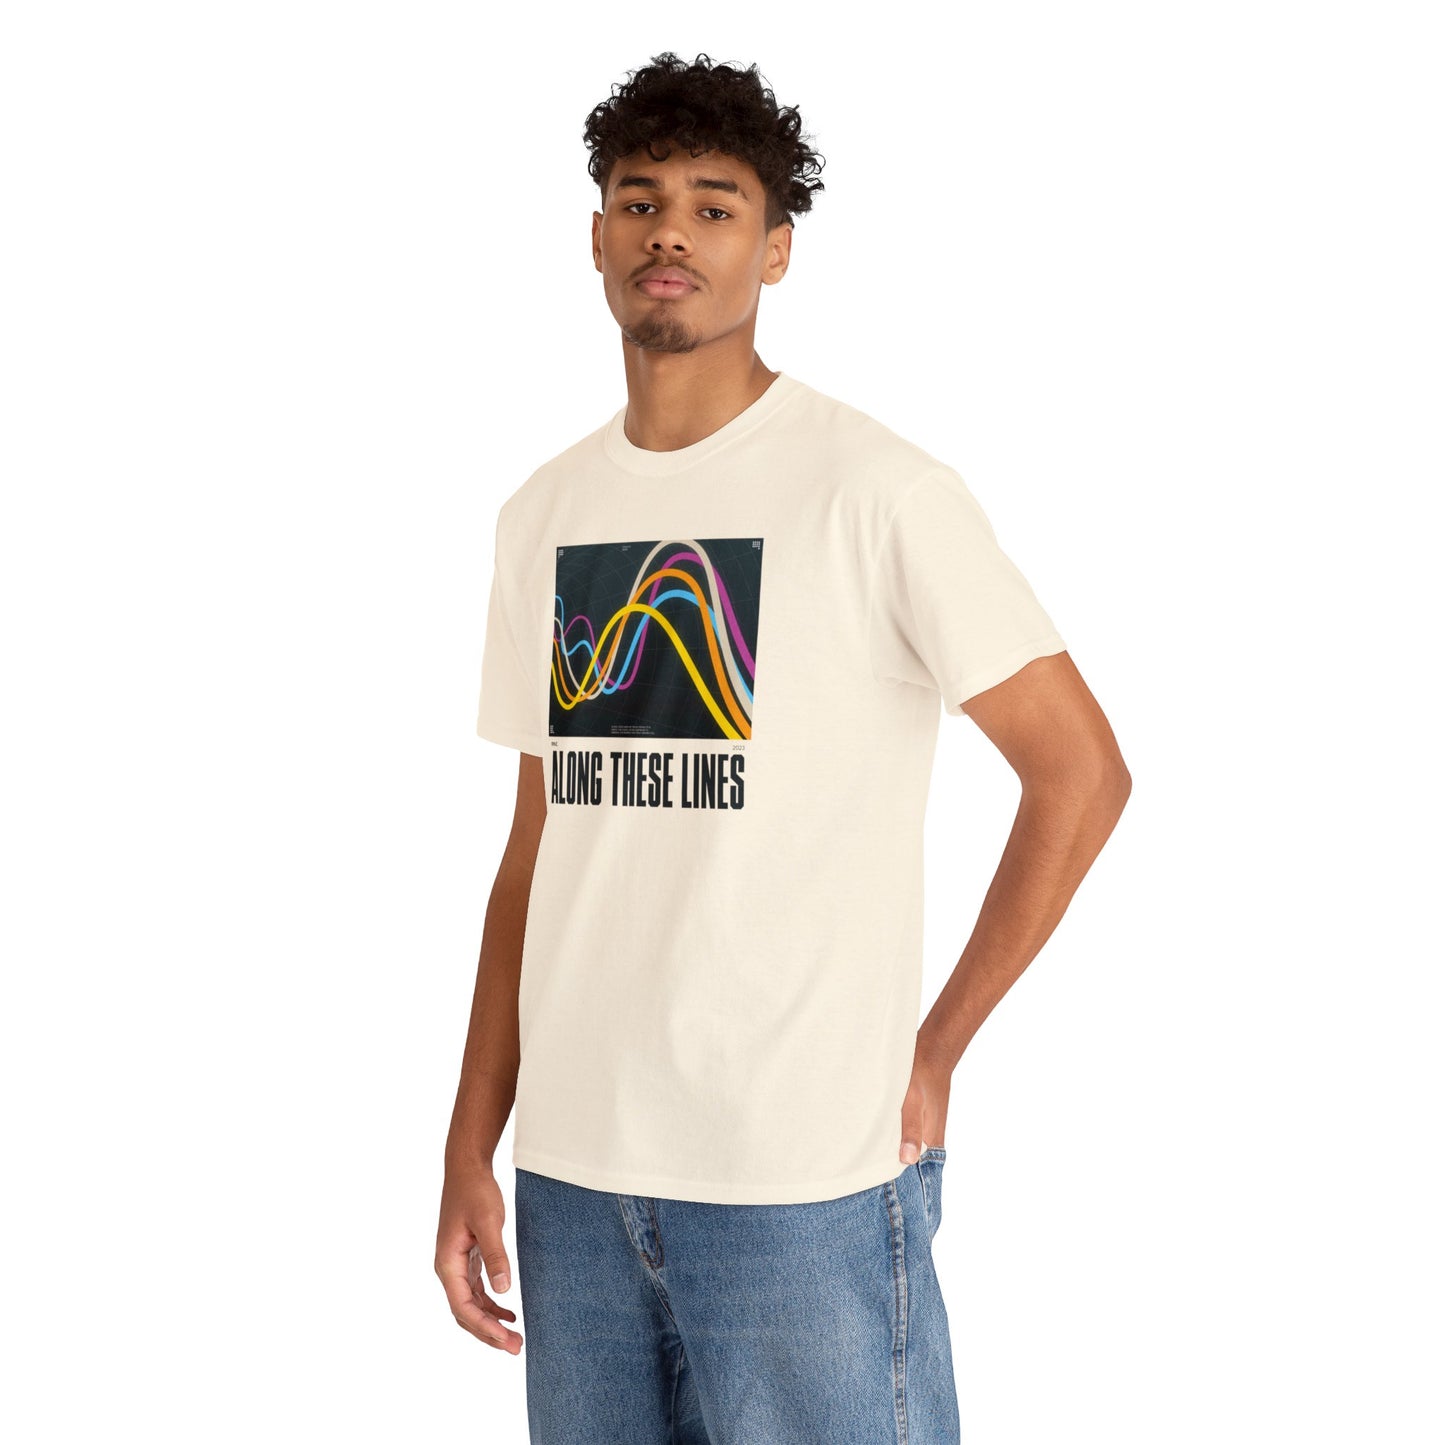 T-Shirt - Along These Lines - Natural/Cream